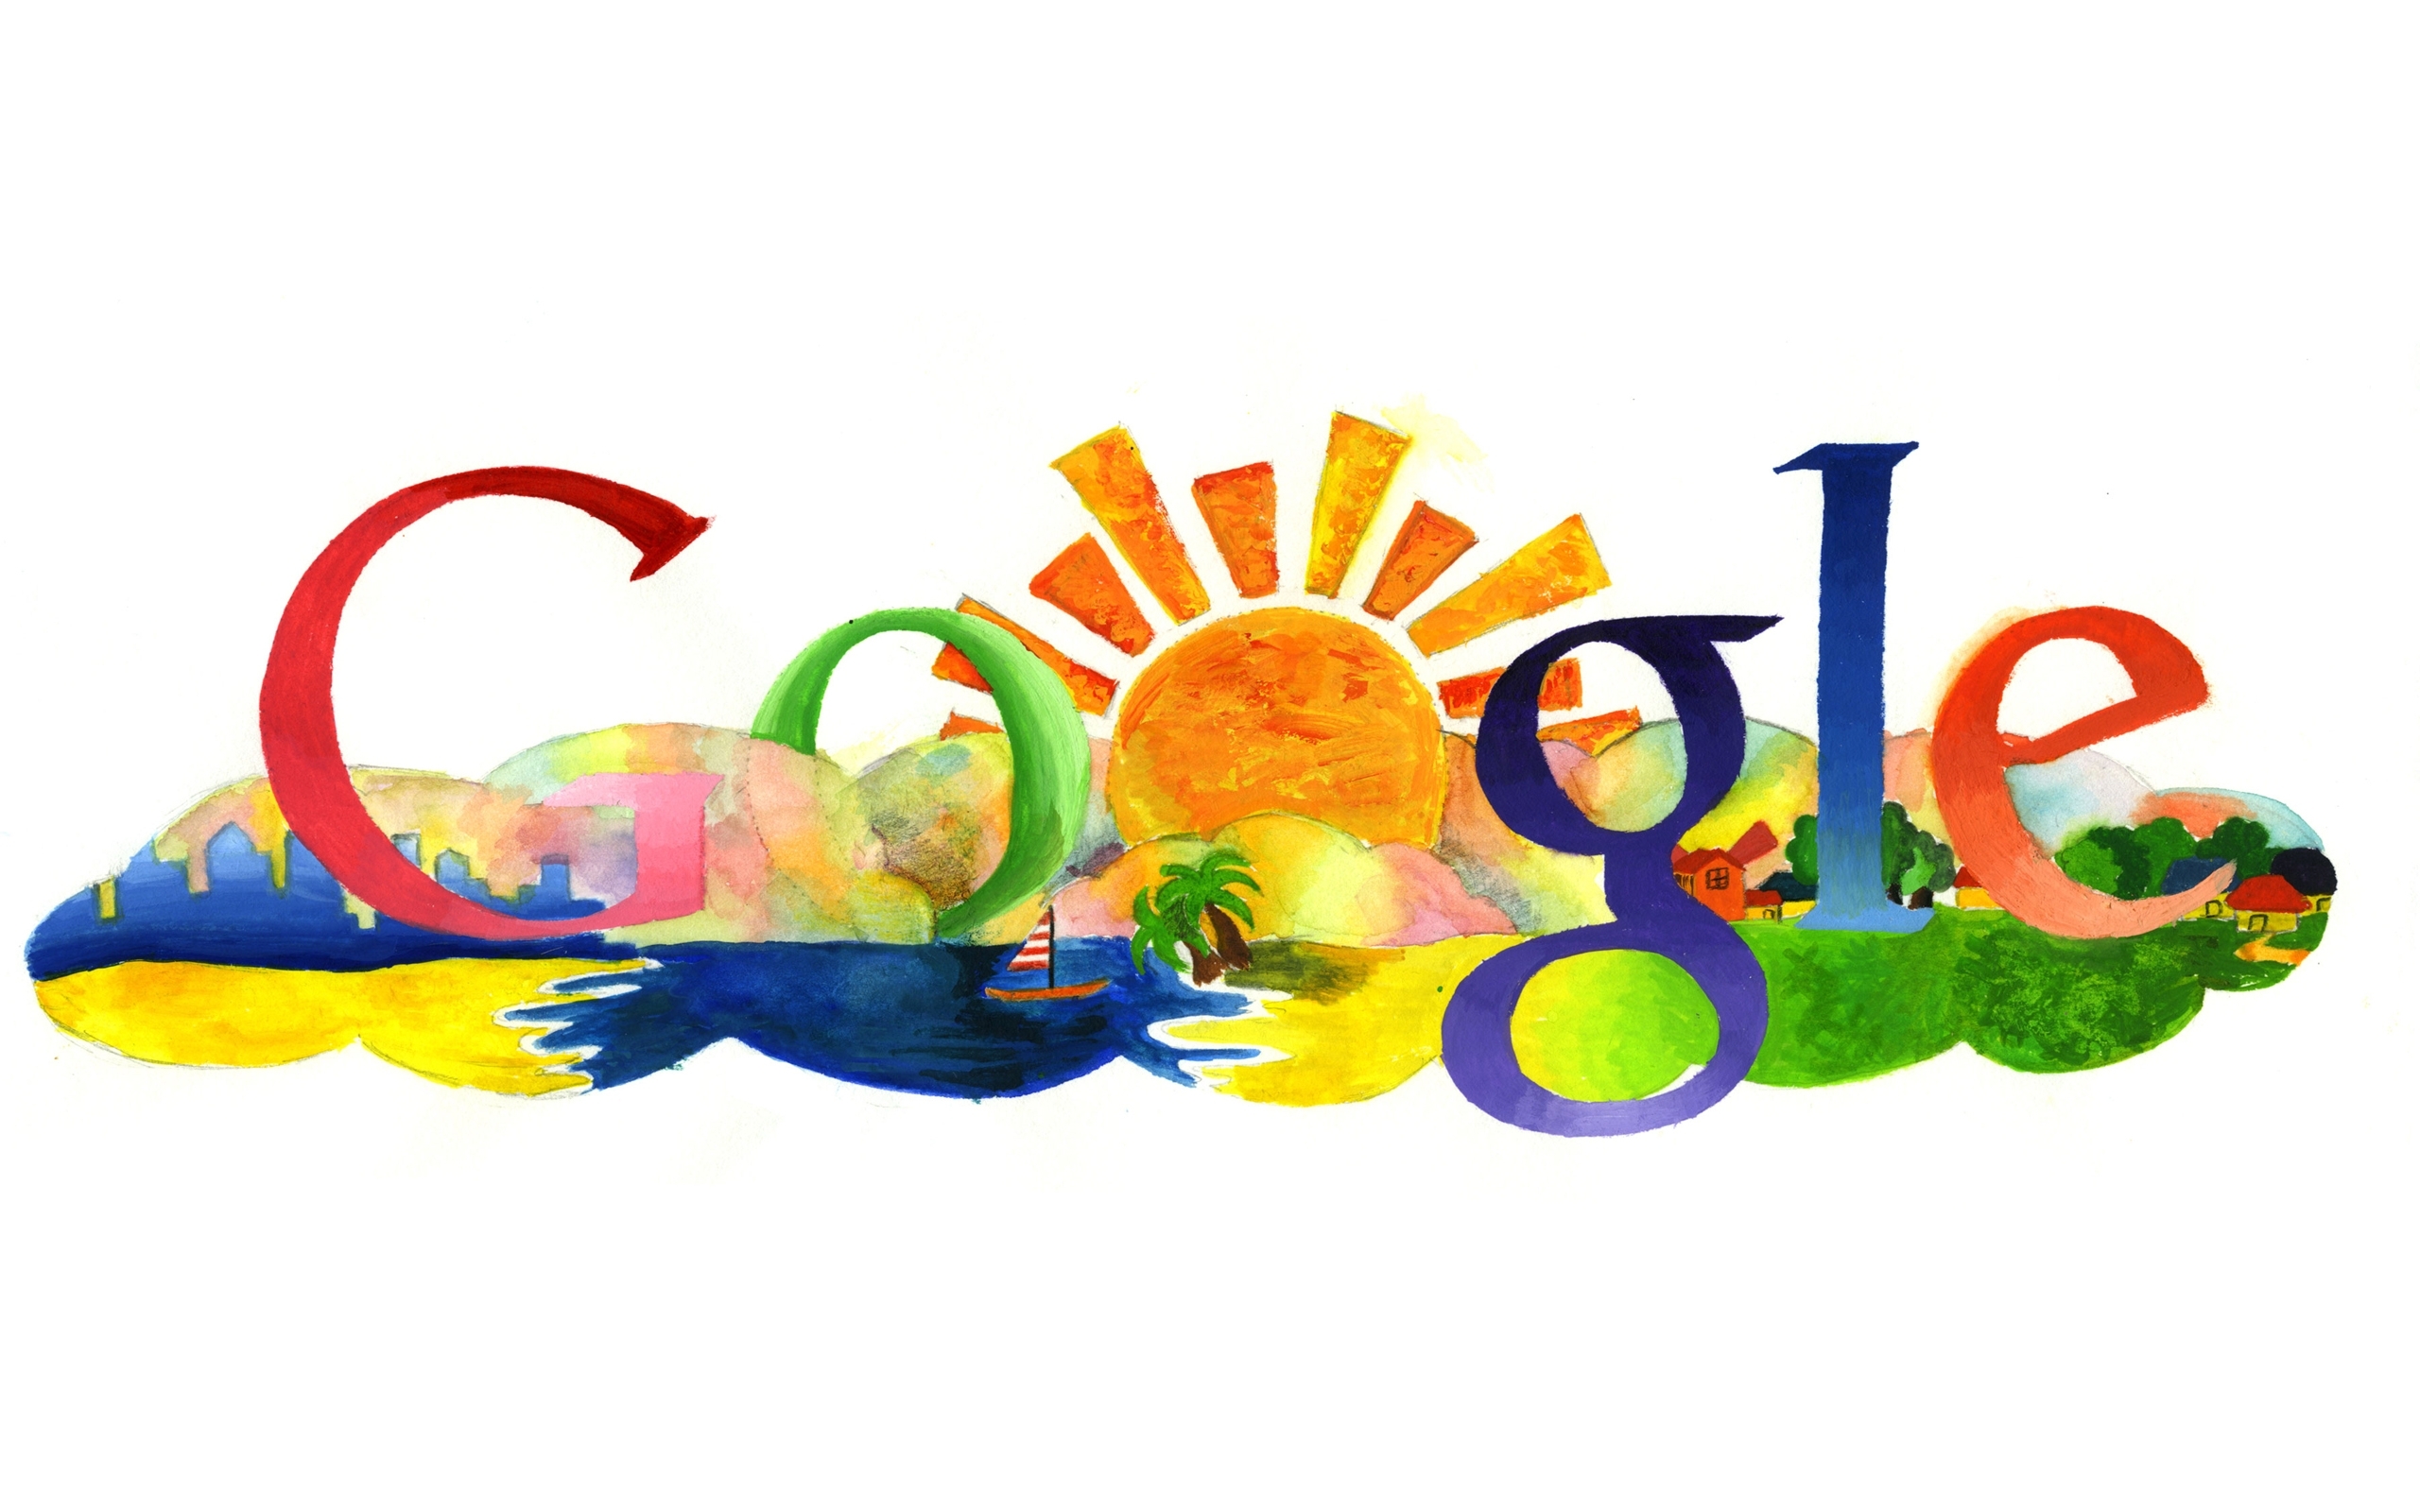 Awesome Collection Of HD Google Wallpaper For